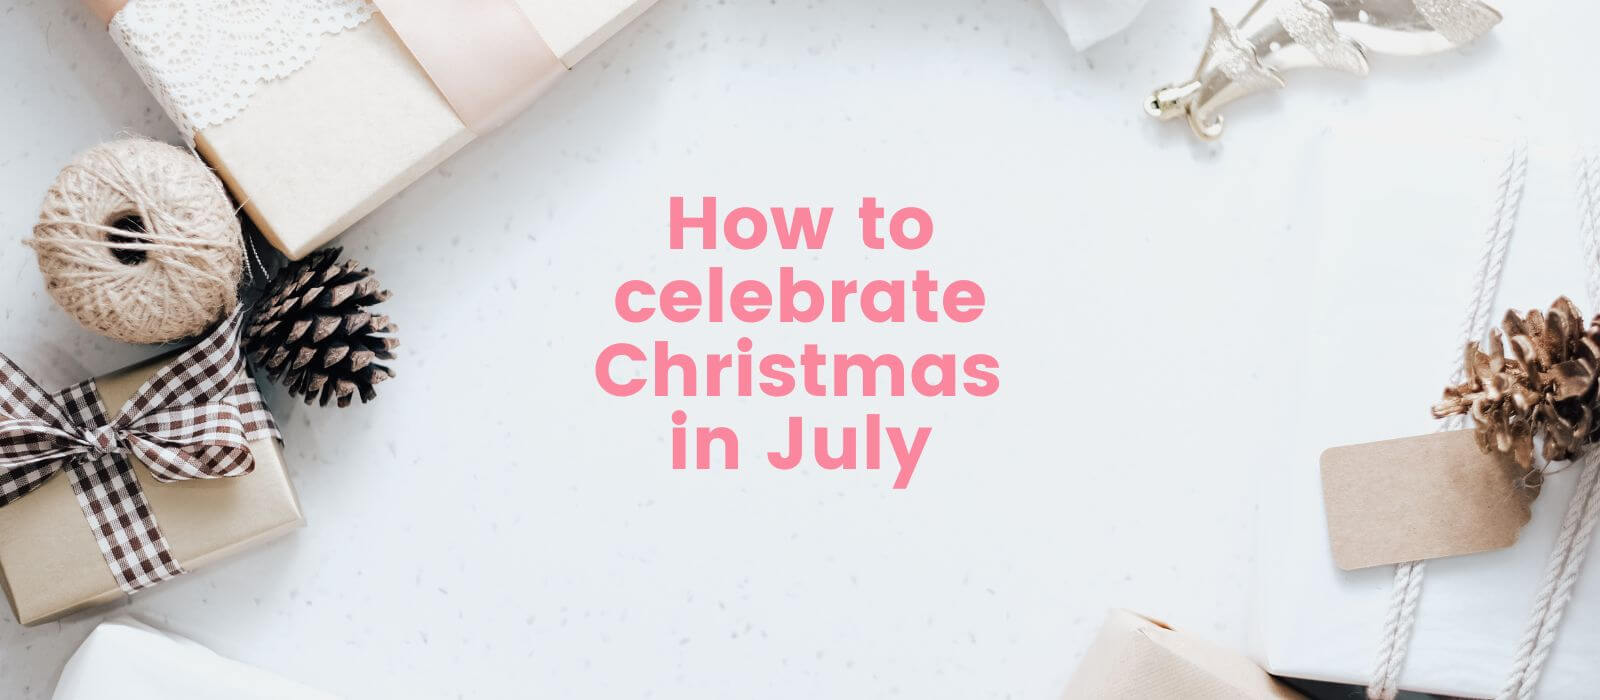 How to celebrate Christmas in July with ideas and planning tips